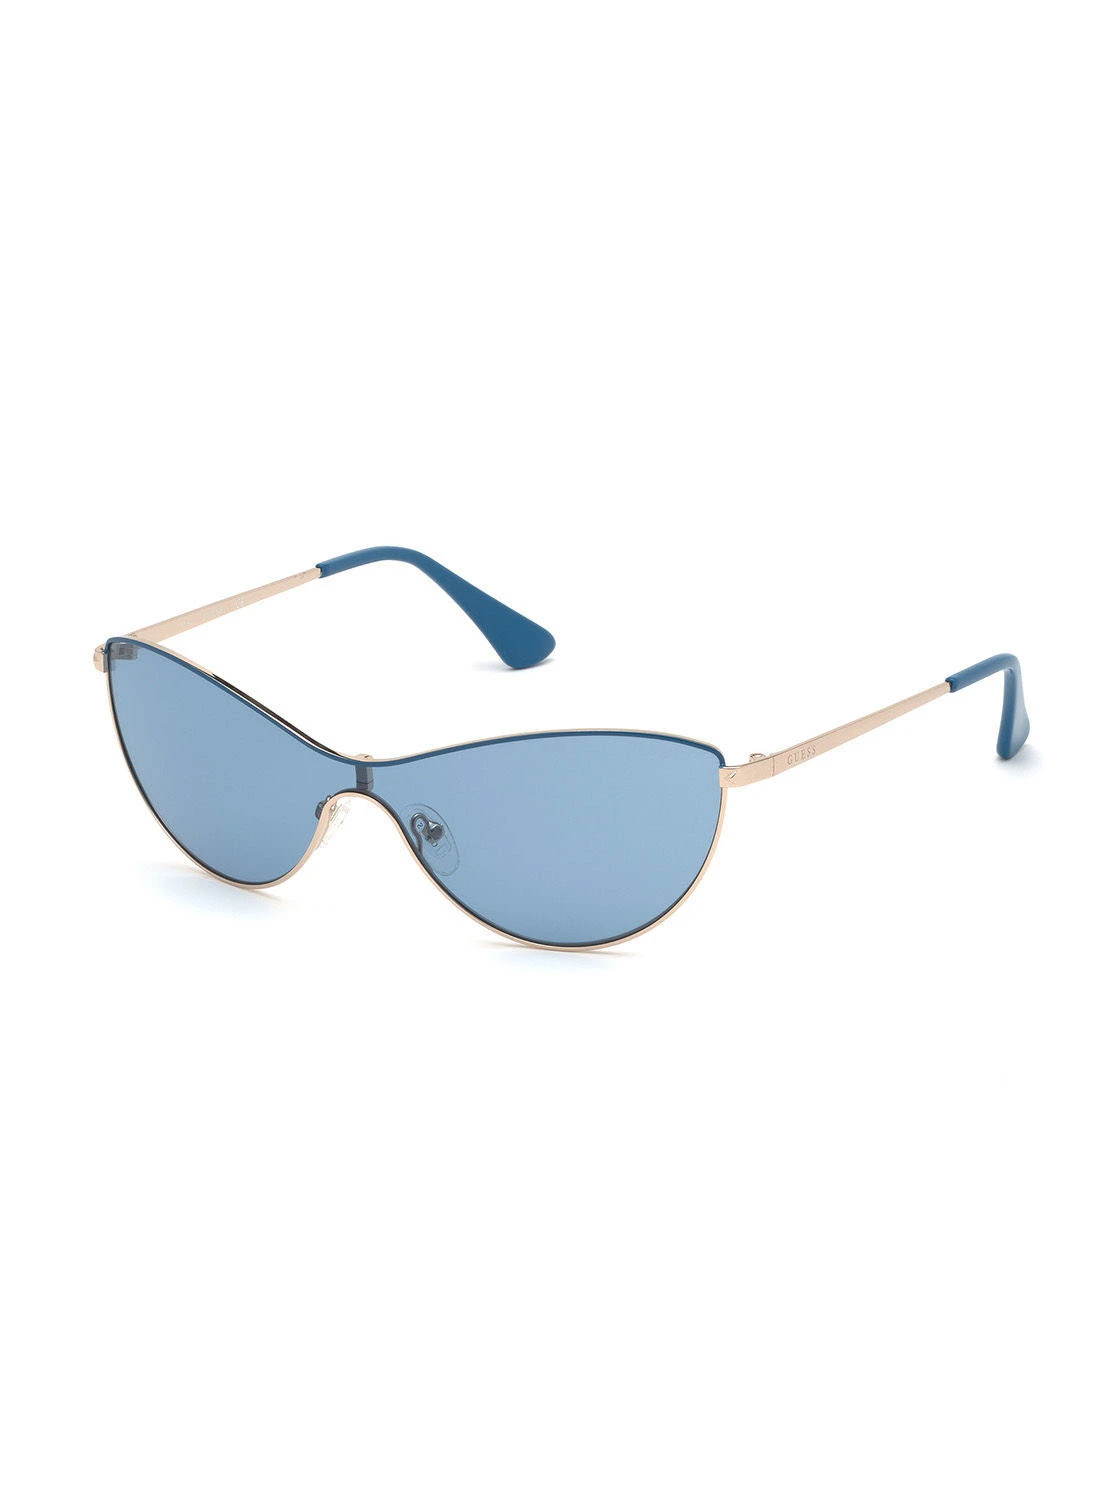 GUESS Women's UV Protection Cat Eye Sunglasses - Lens Size: 54 mm